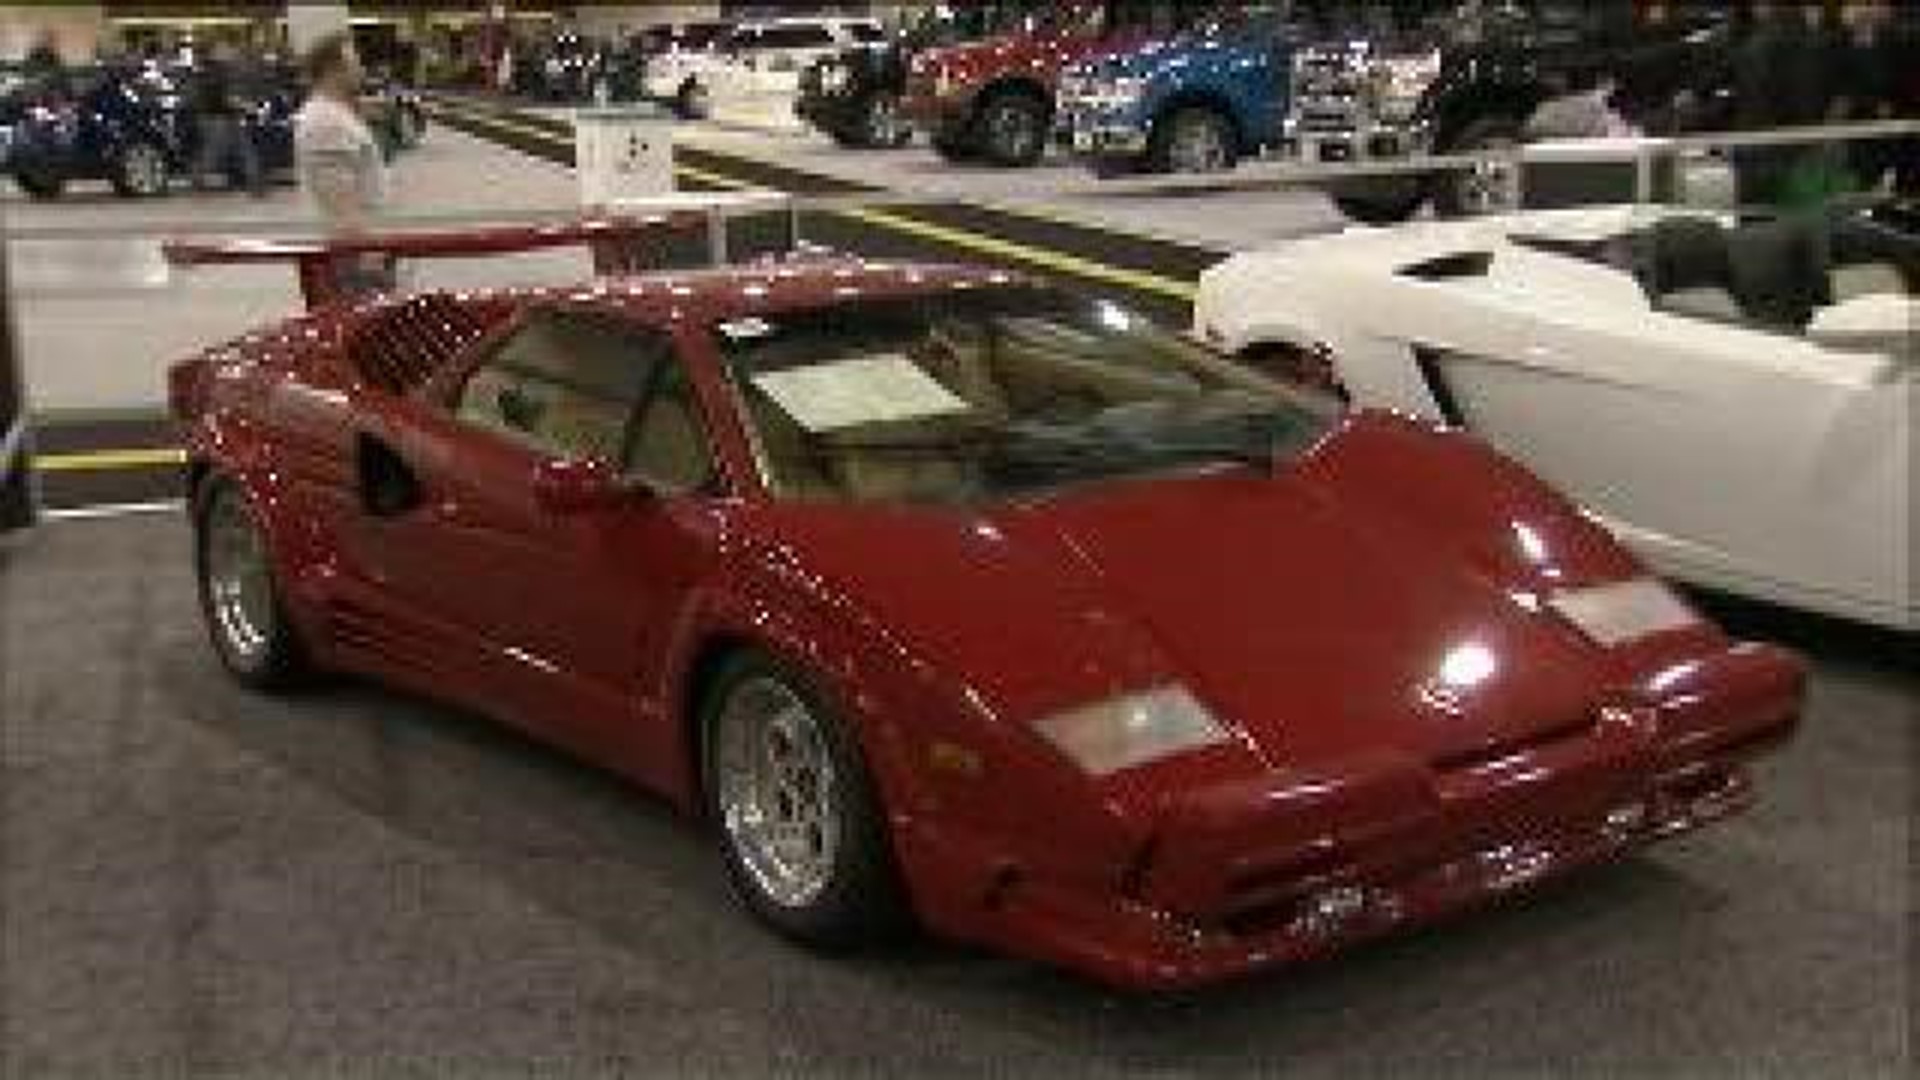 Philly Auto Show: Fun Competitions